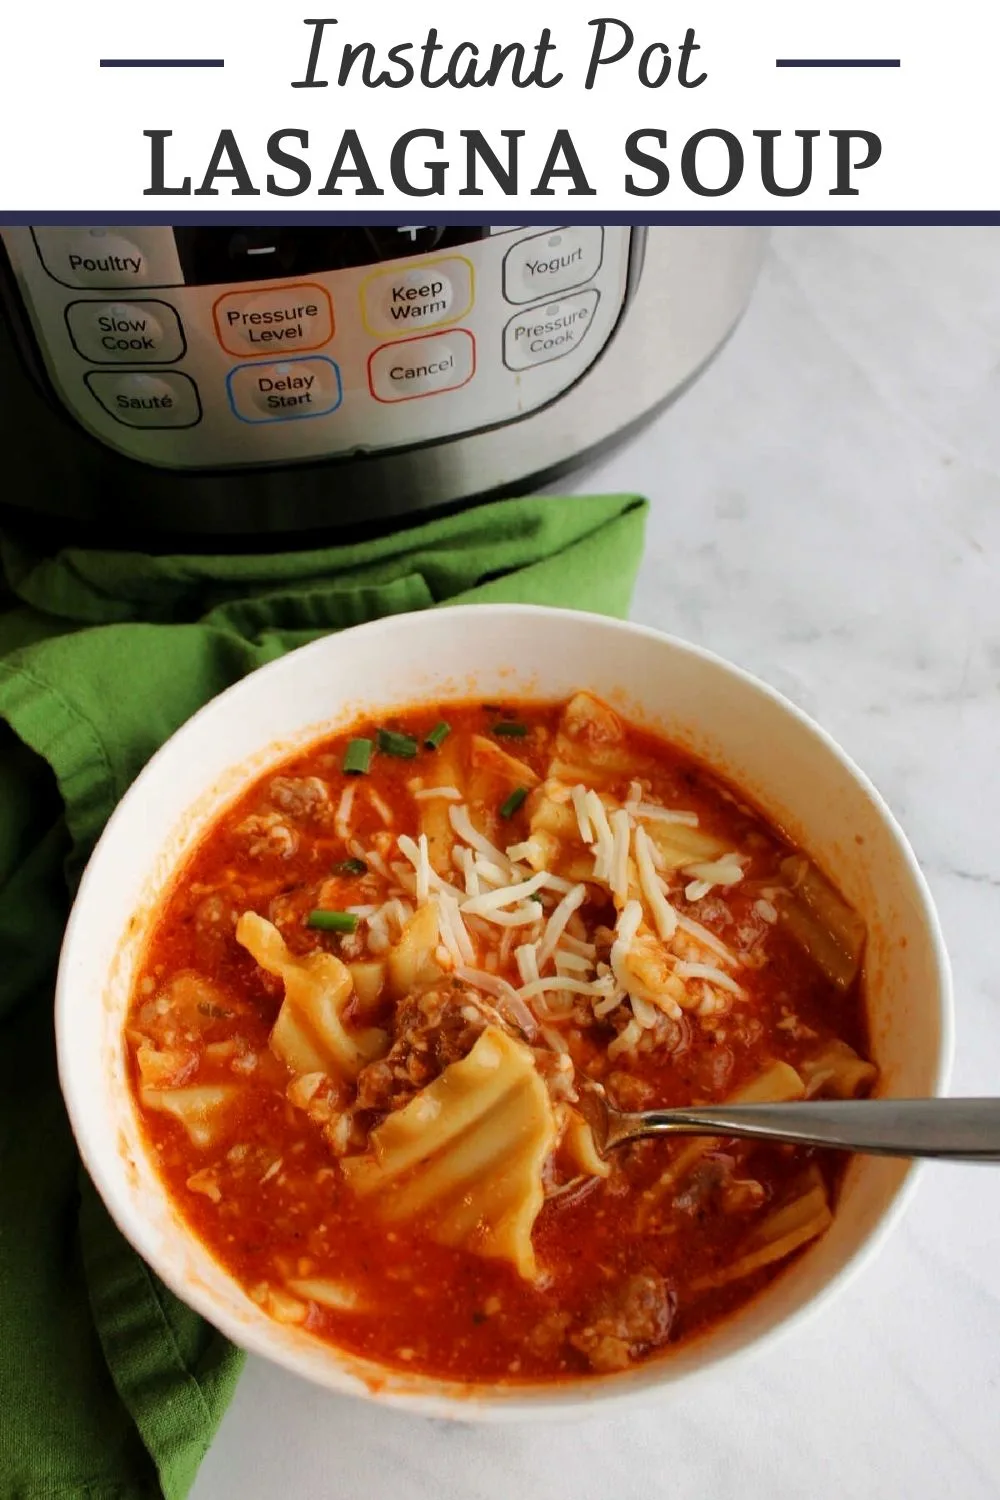 Lasagna soup is quick and easy to make with the help of an instant pot. It has all of the yummy flavors of lasagna but in a hot steaming bowl of soup comfort.